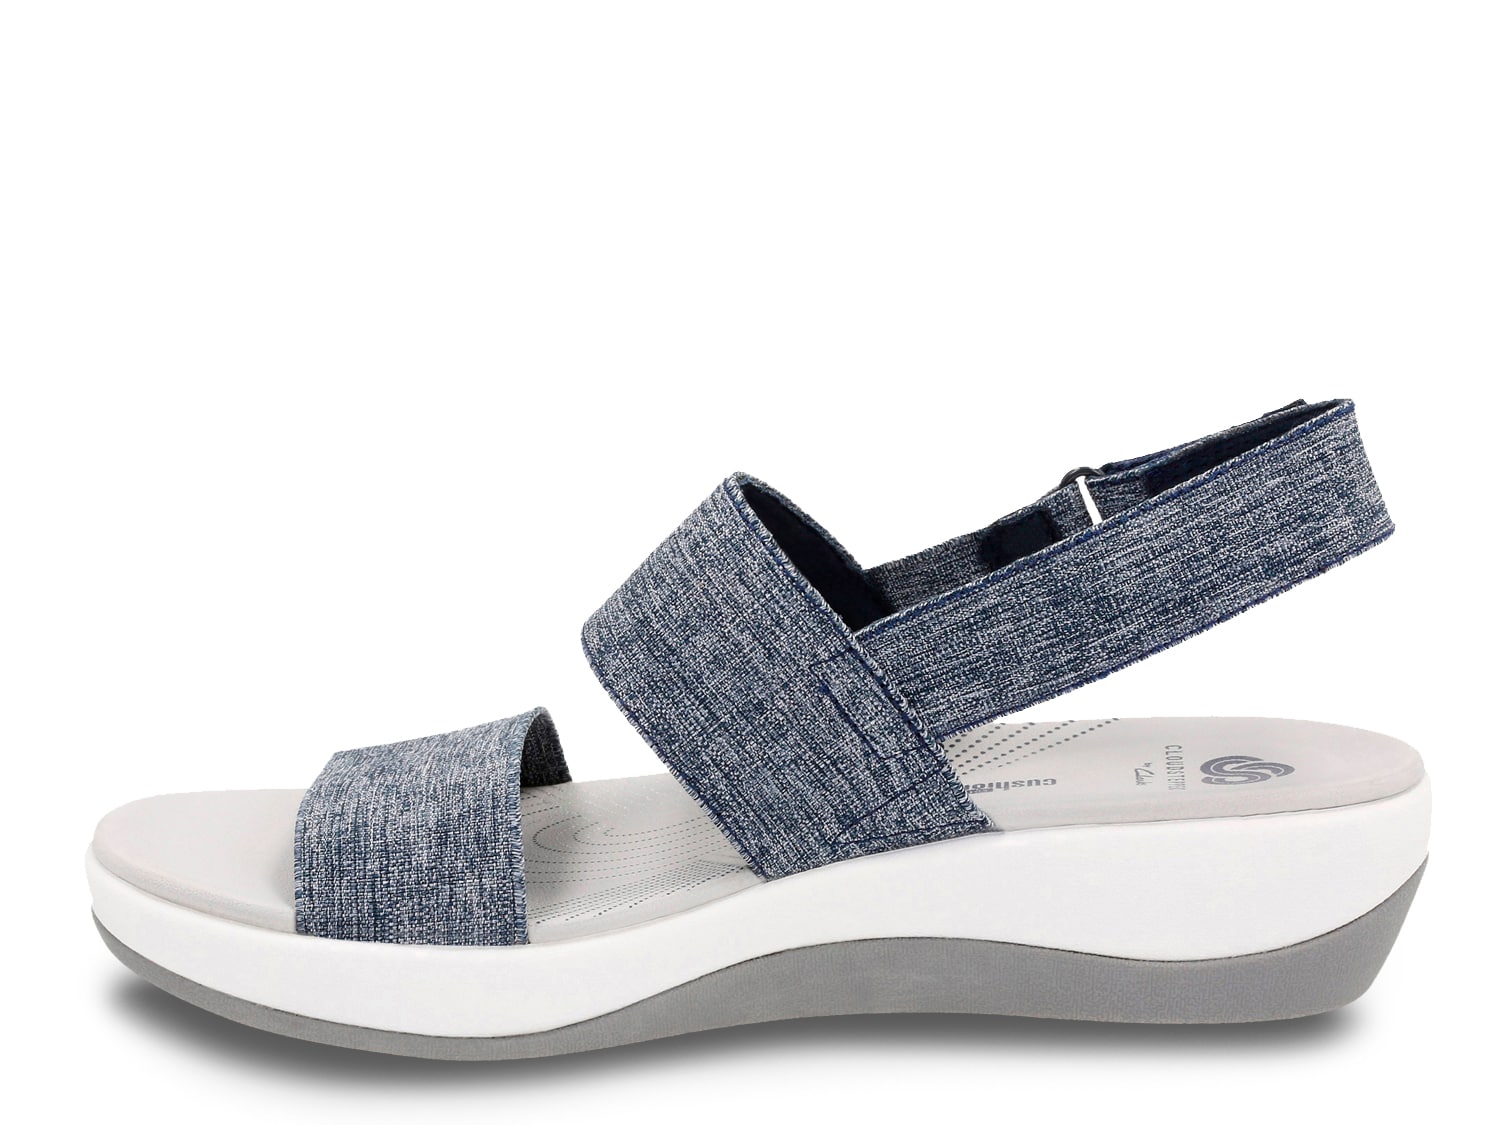 Cloudsteppers by Clarks Arla Jacory Sandal | DSW